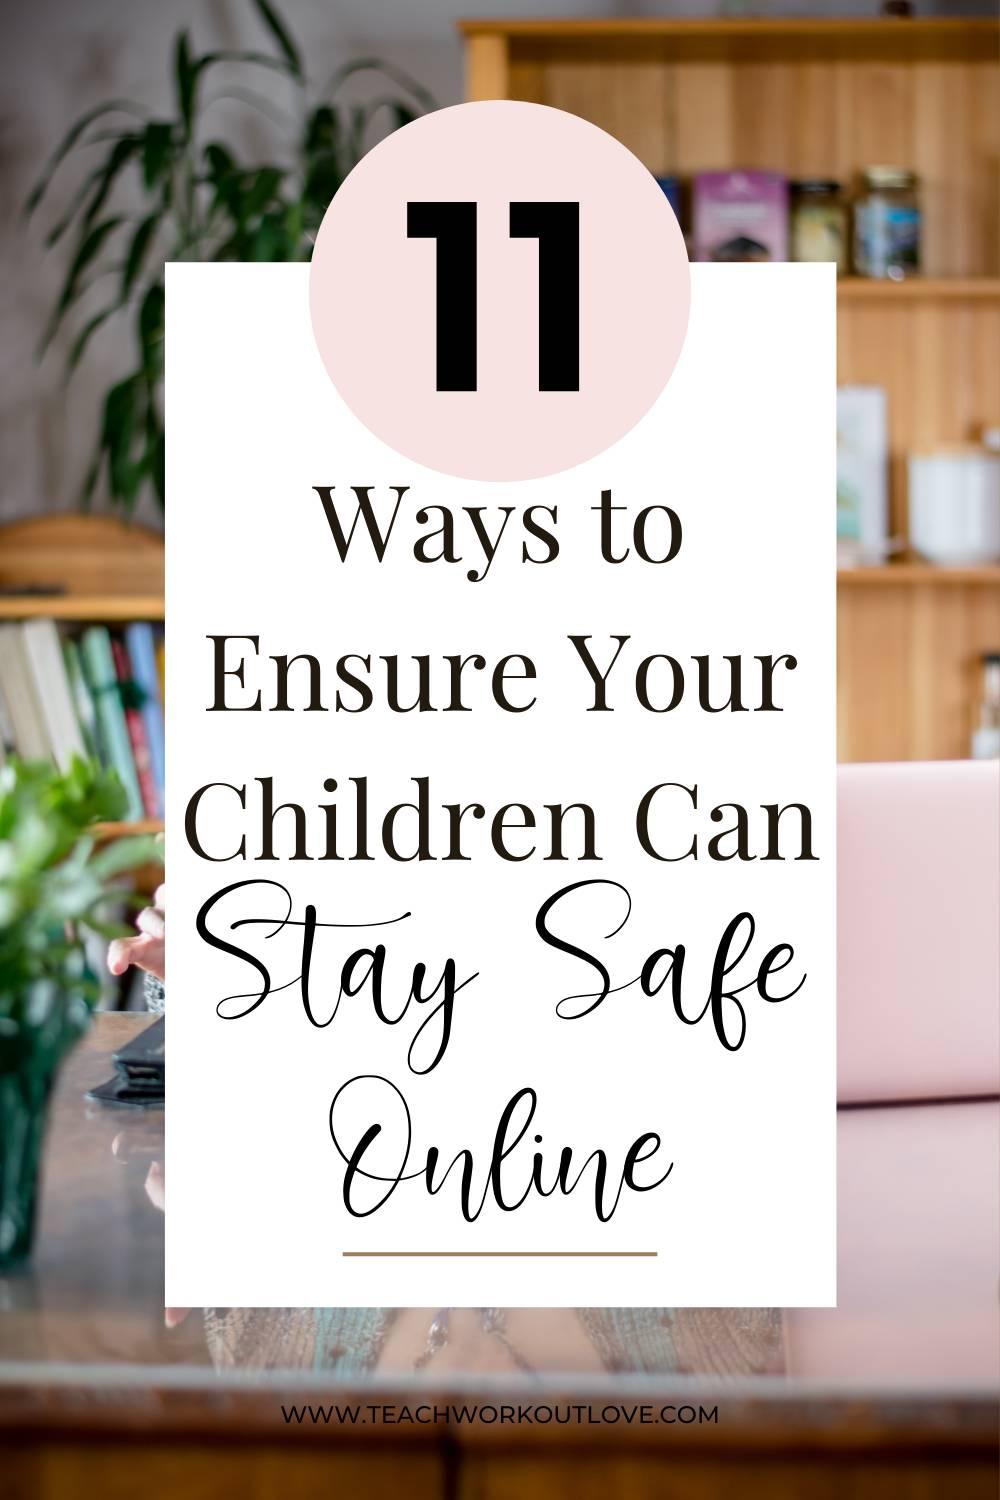 Parenting is already hard, but with smartphones & social media, it's super challenging. Here's some tips to have kids stay safe online.